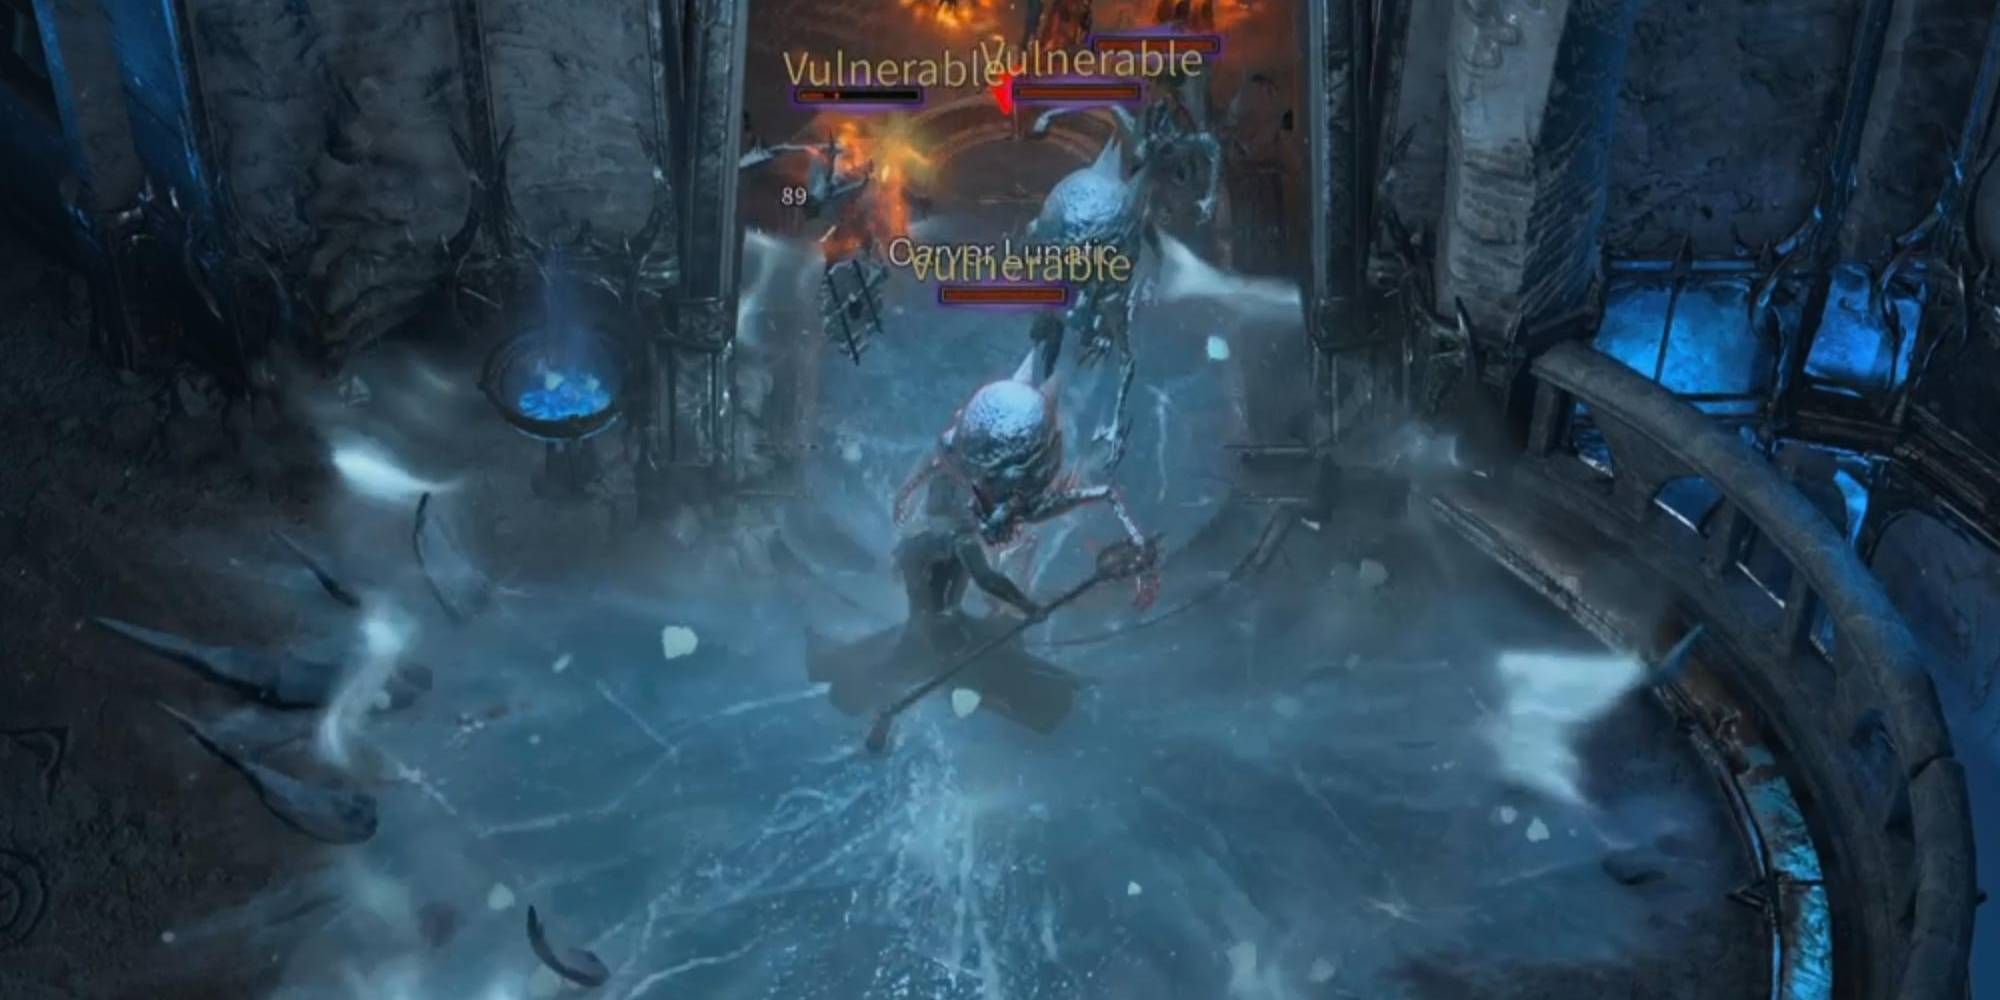 Diablo 4 Beta Sorcerer Using Ice Magic Skill to Freeze Enemies and Give them Vulnerable Debuff